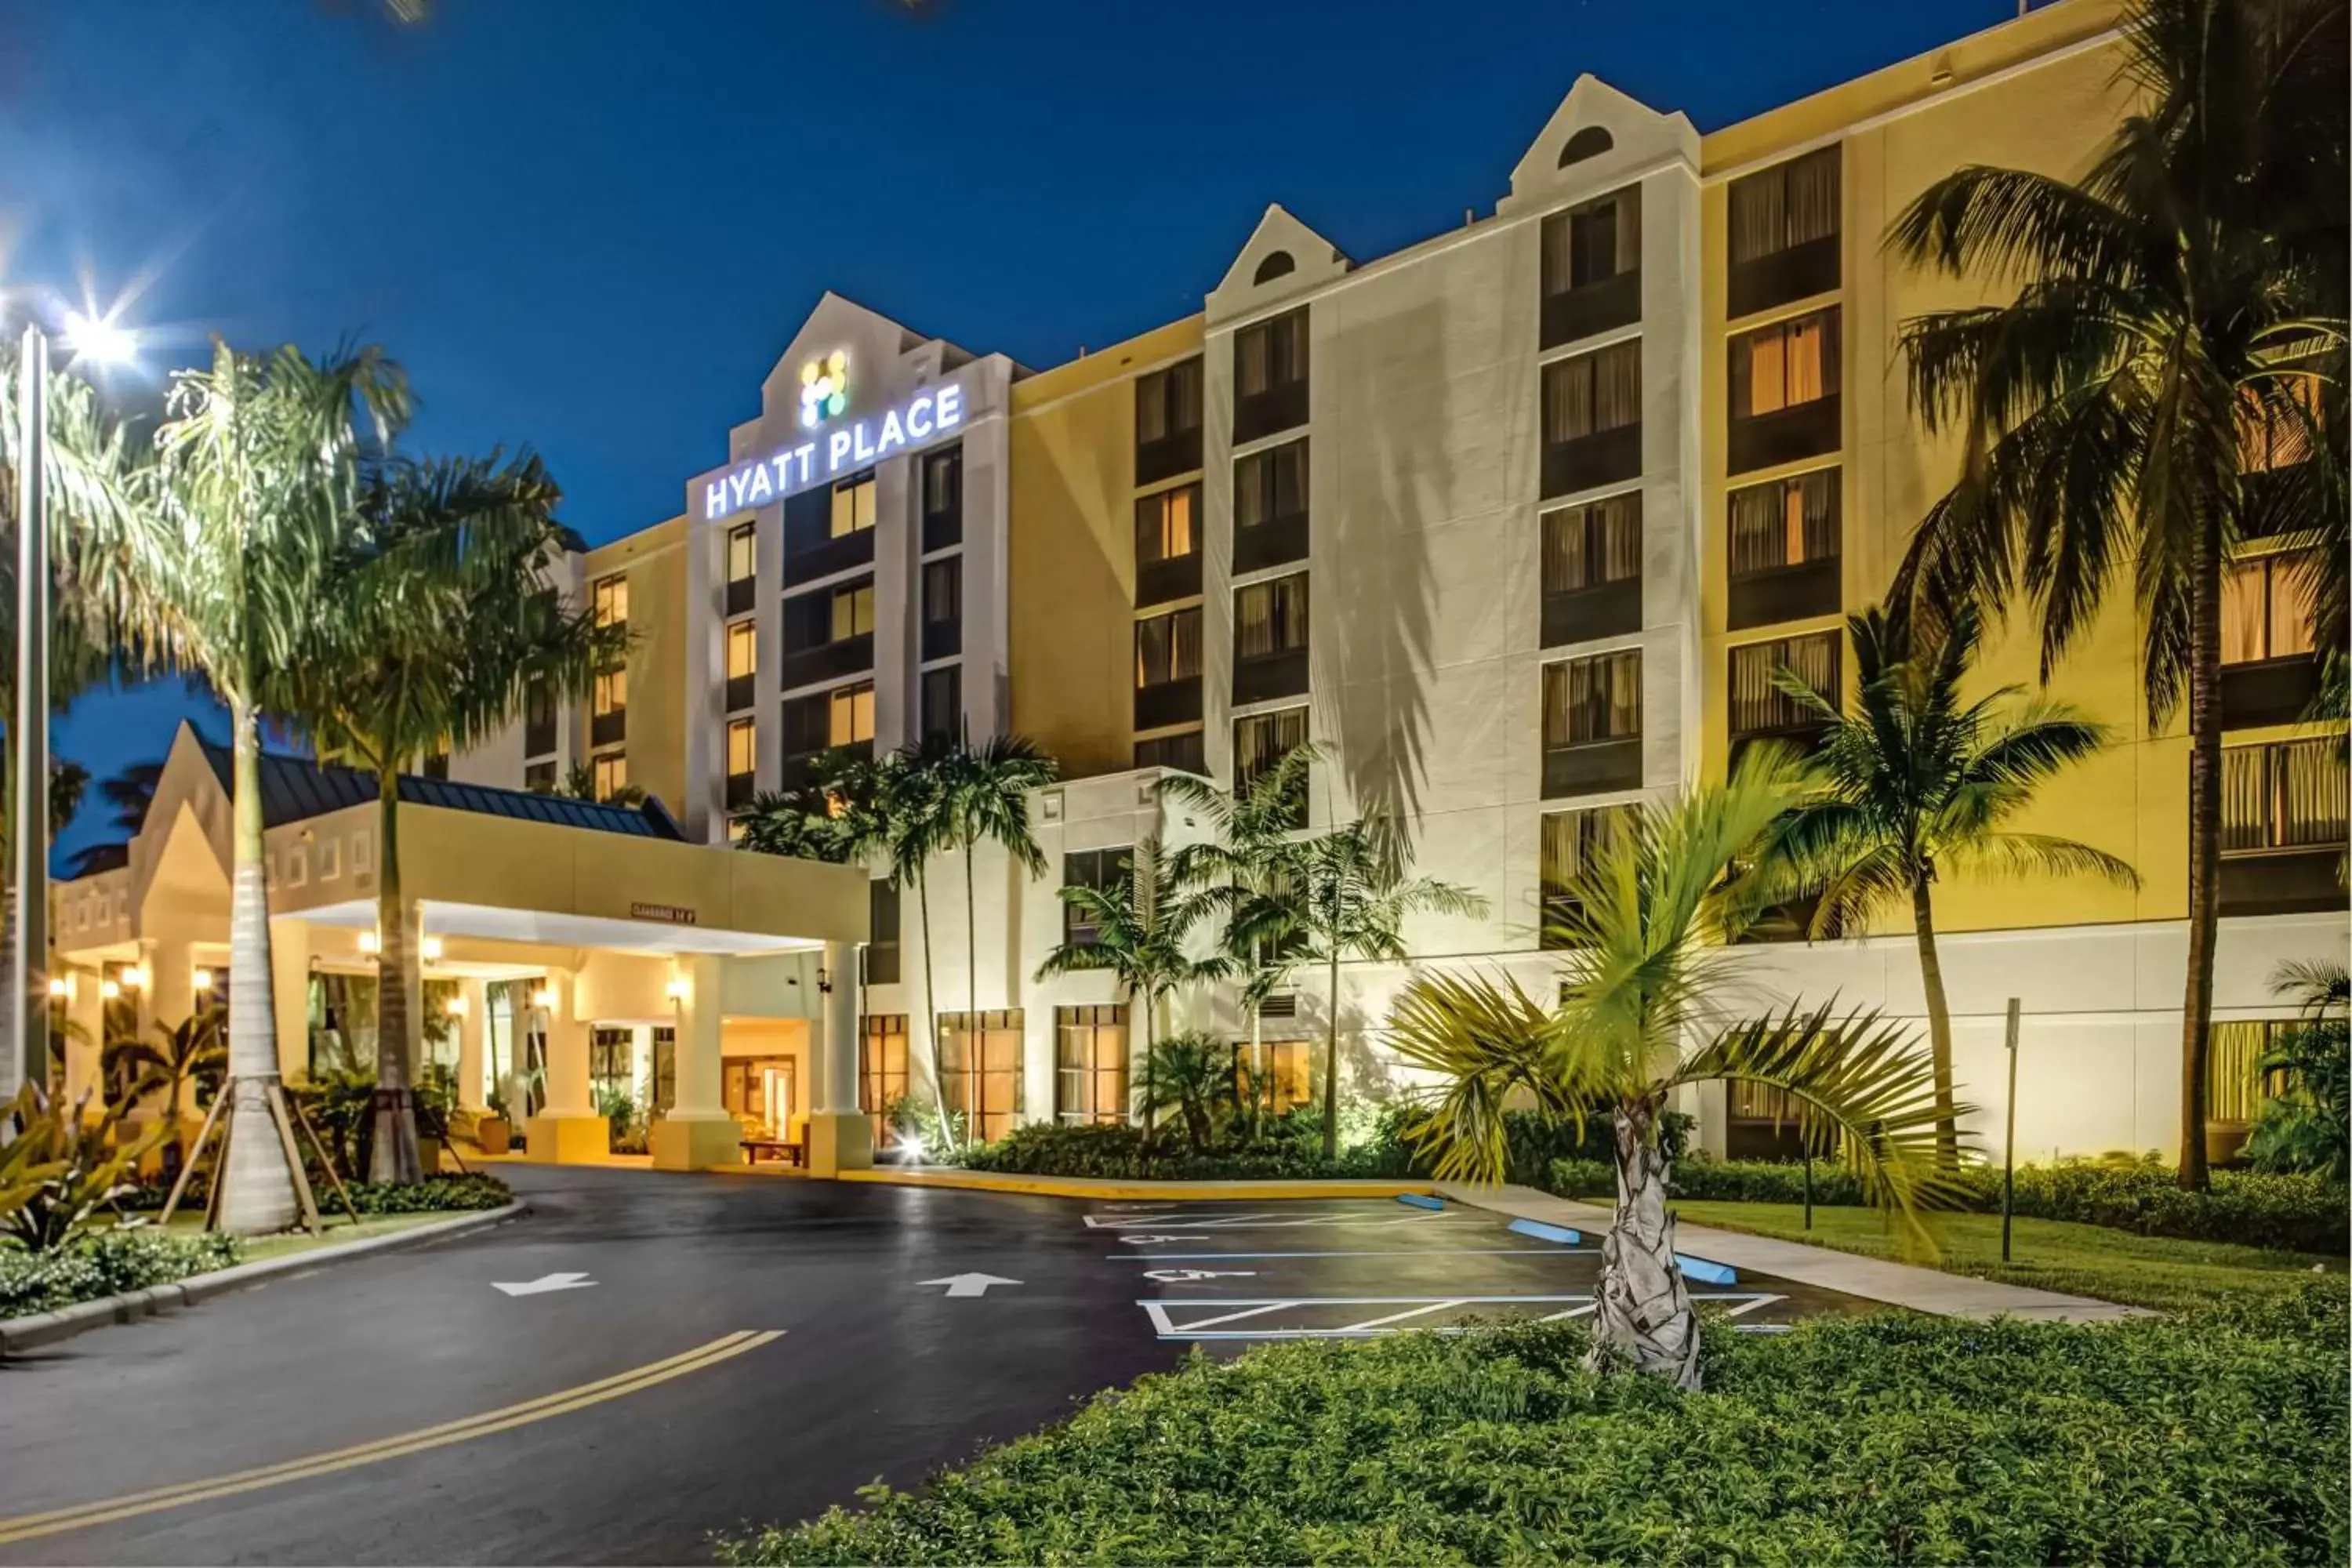 Property Building in Hyatt Place Fort Lauderdale Cruise Port & Convention Center